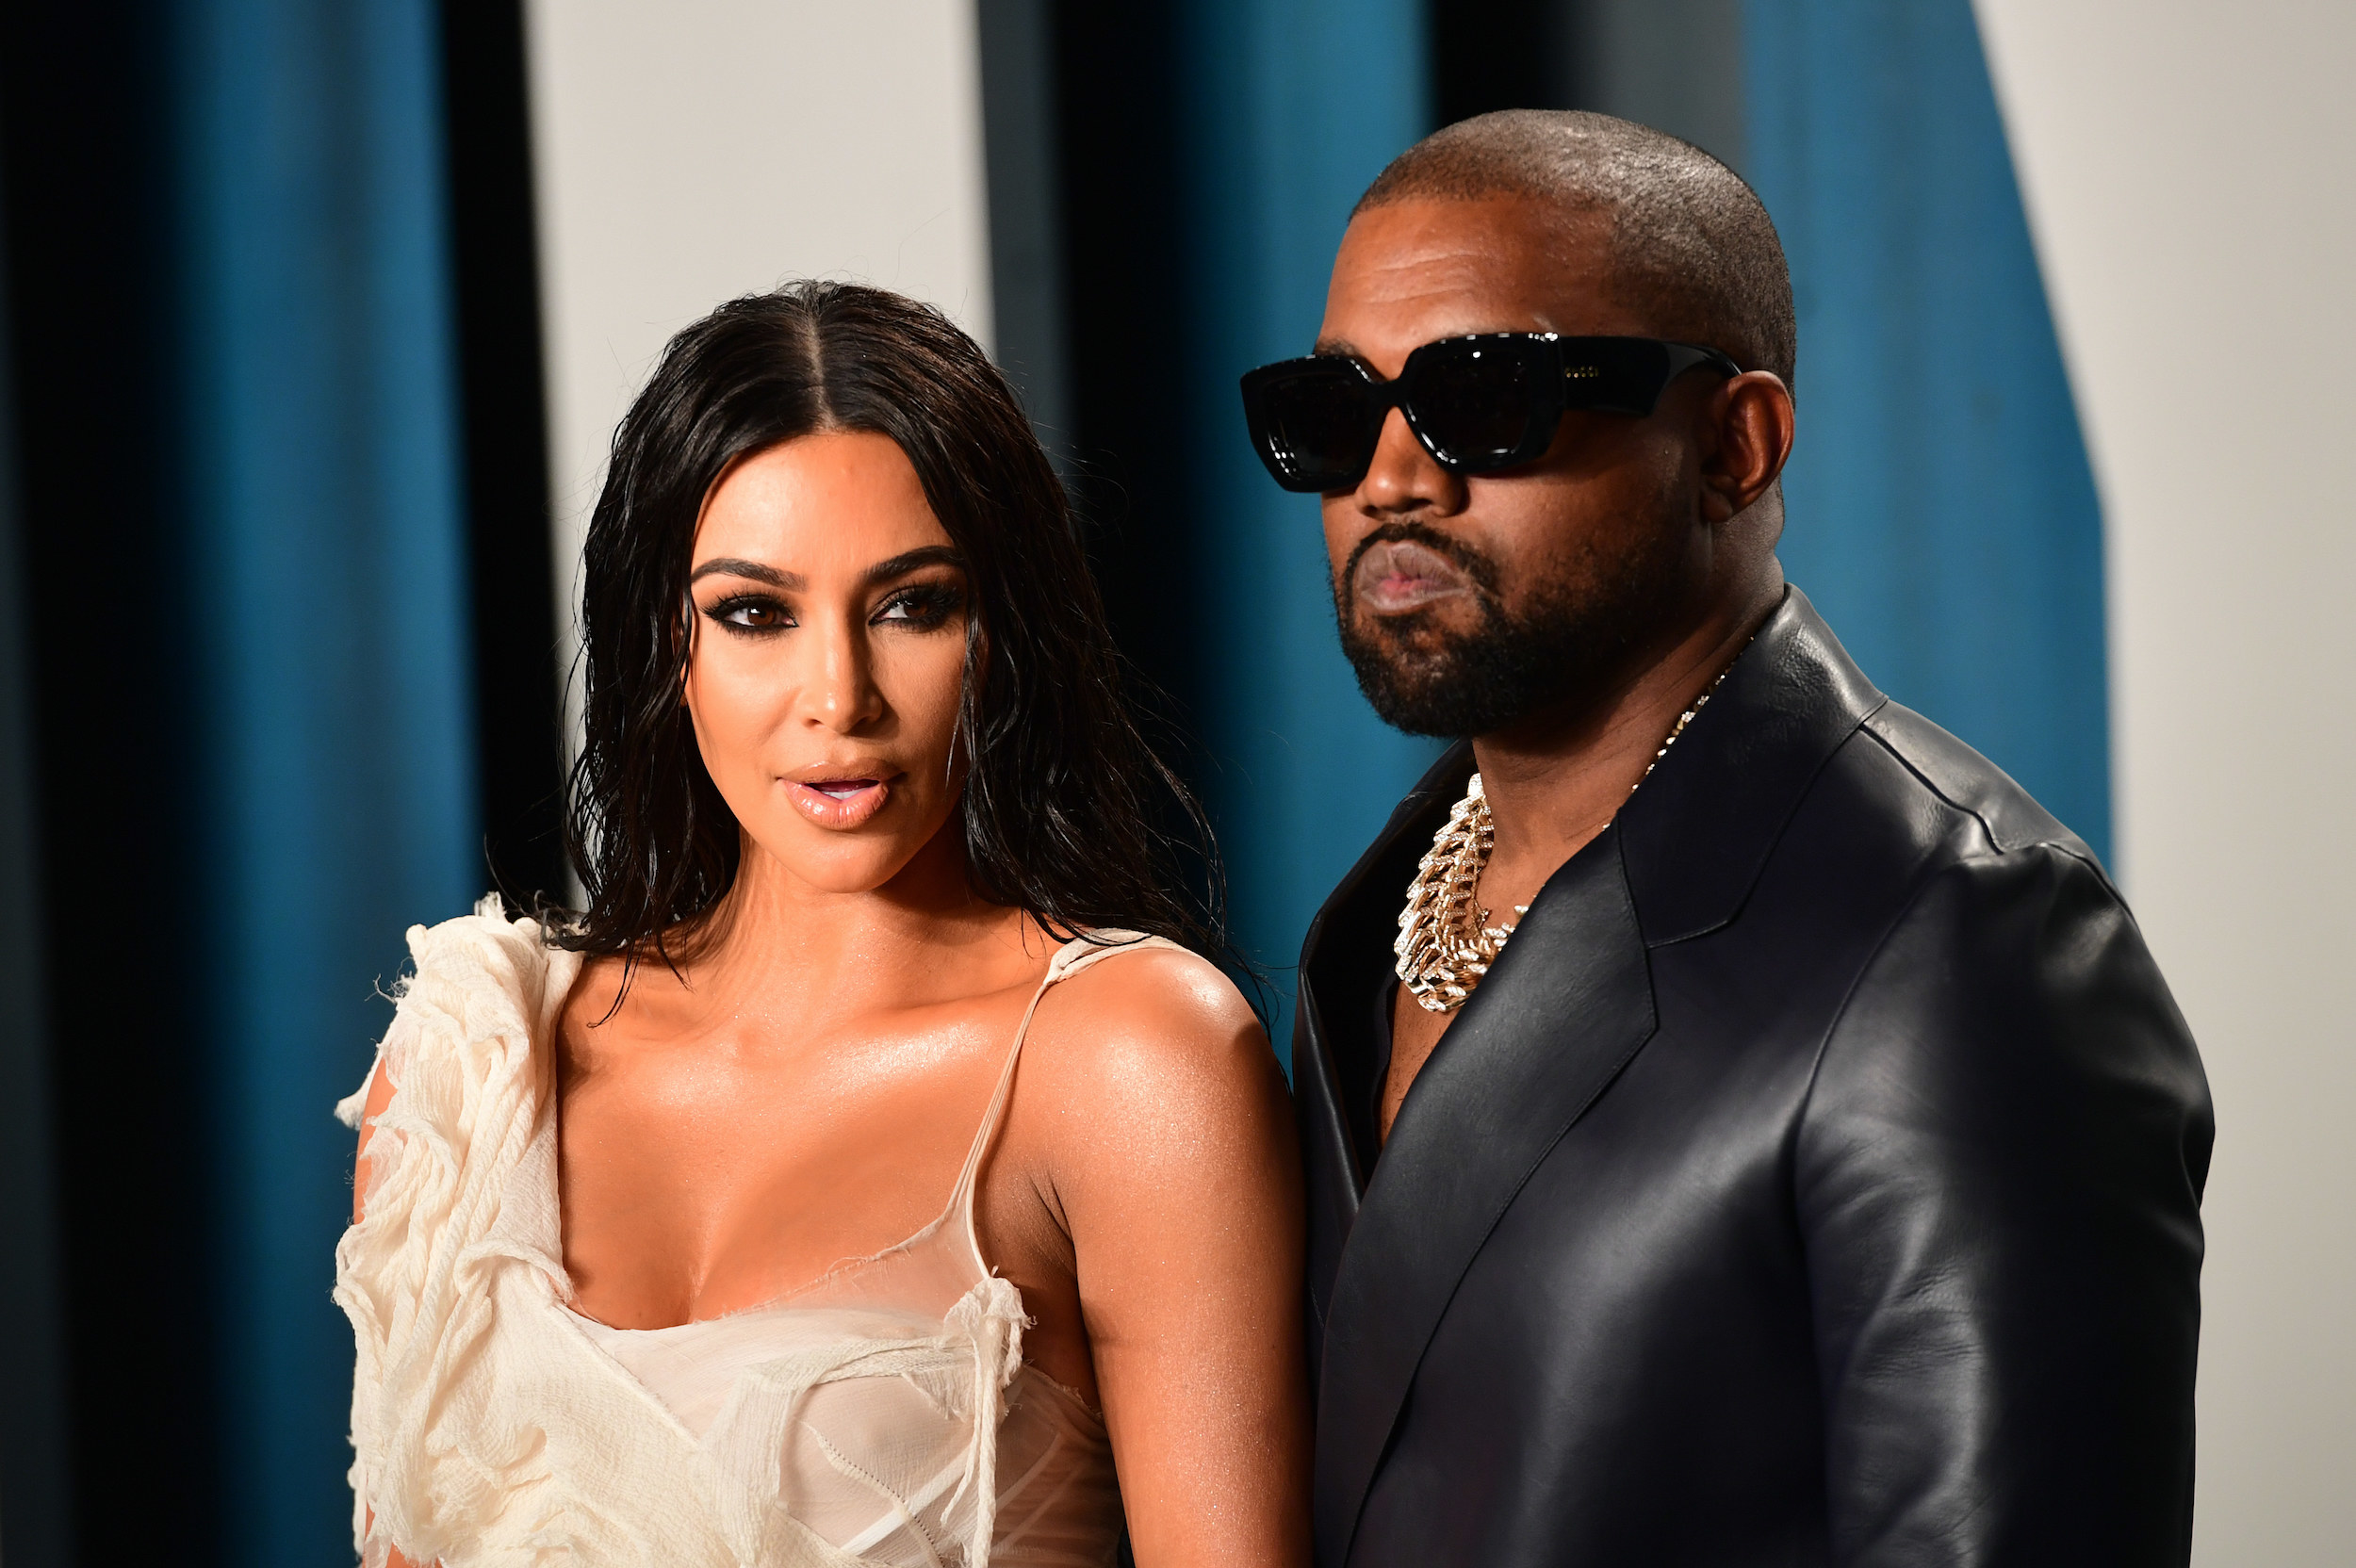 Kim Kardashian and Kanye West attending the Vanity Fair Oscar Party held at the Wallis Annenberg Center for the Performing Arts in Beverly Hills, Los Angeles, California, USA